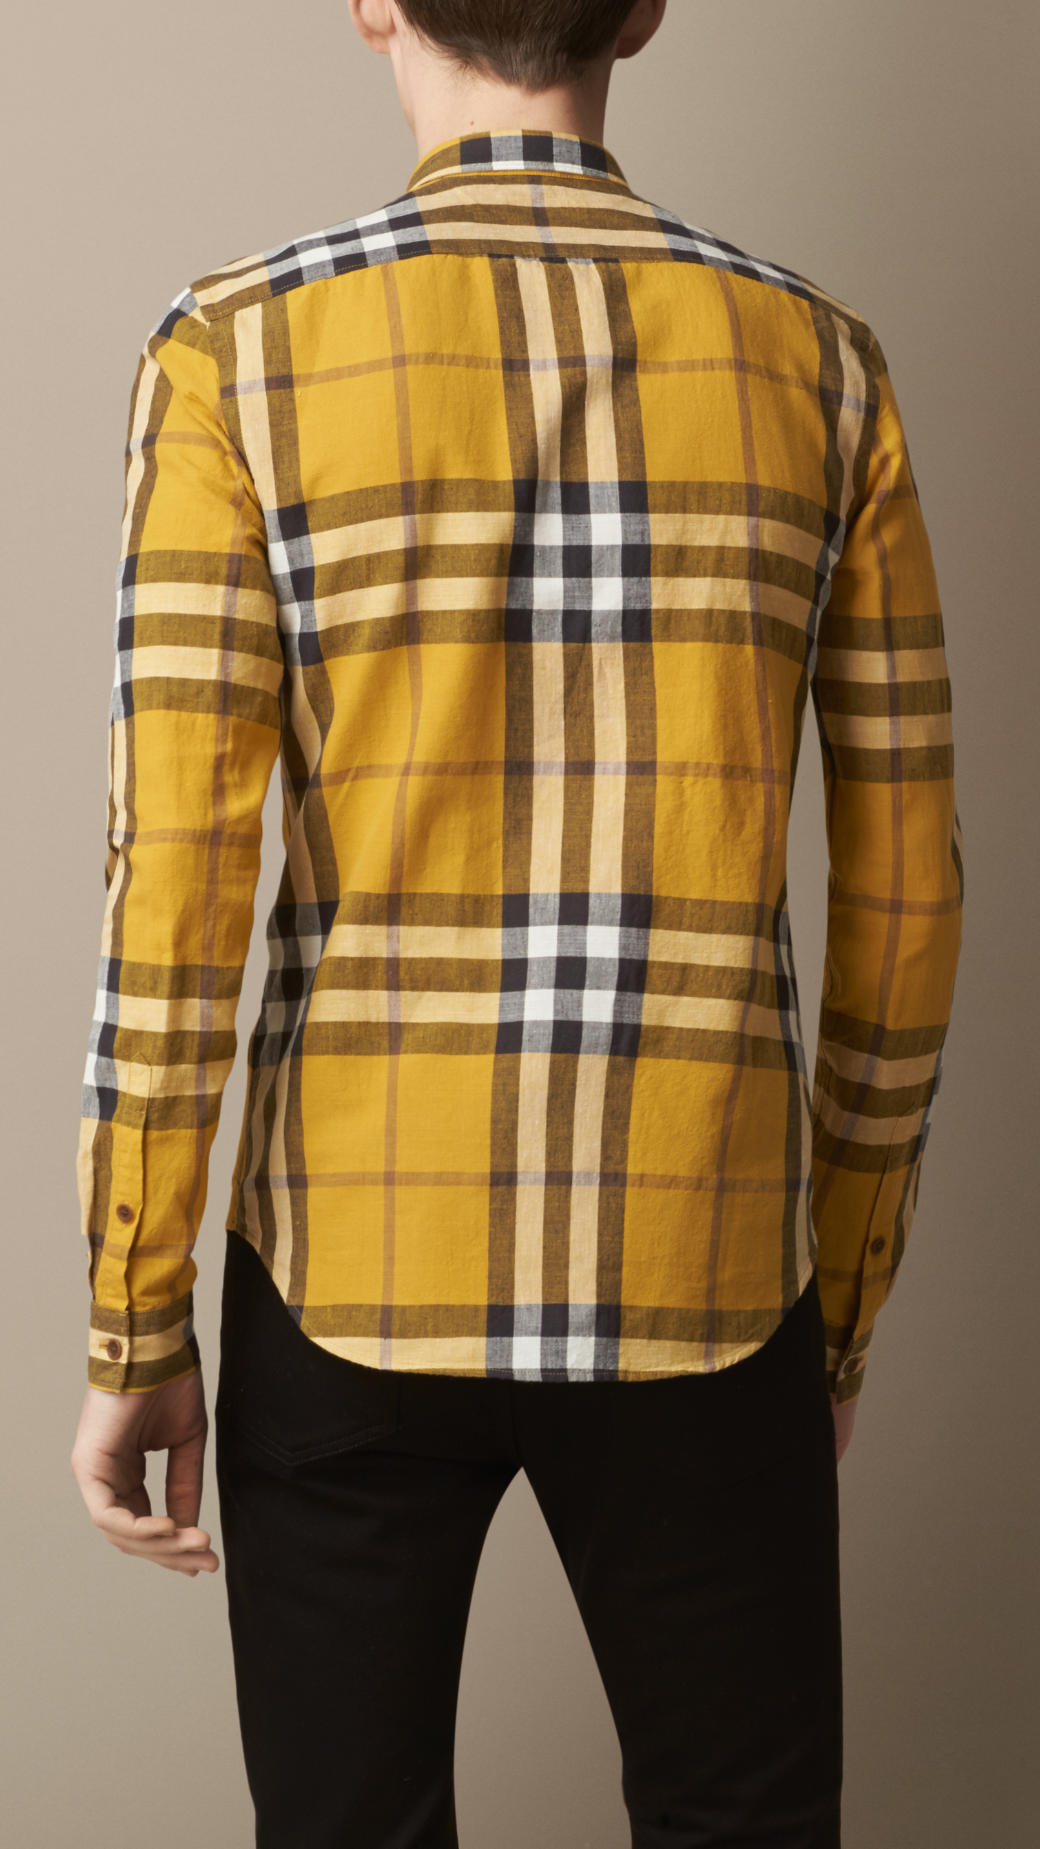 Burberry Exploded Check Cotton Linen Shirt in Yellow for Men - Lyst